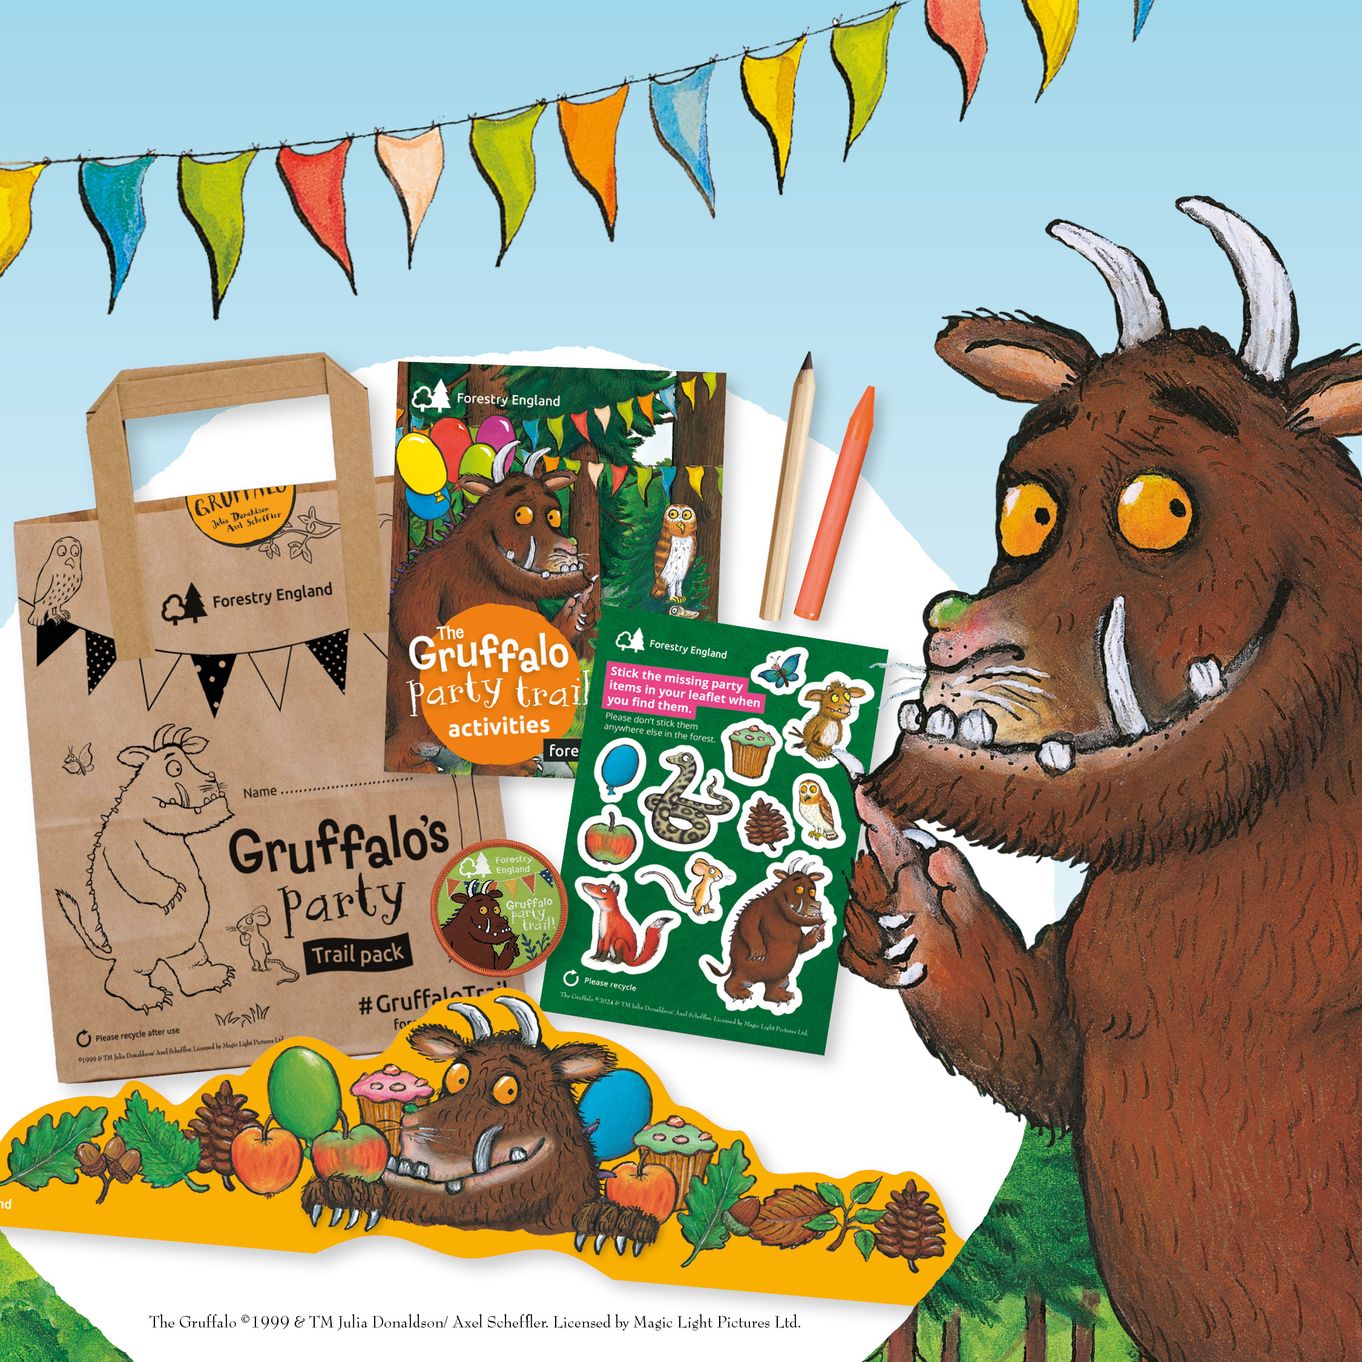 The Gruffalo Party Trail at Whinlatter